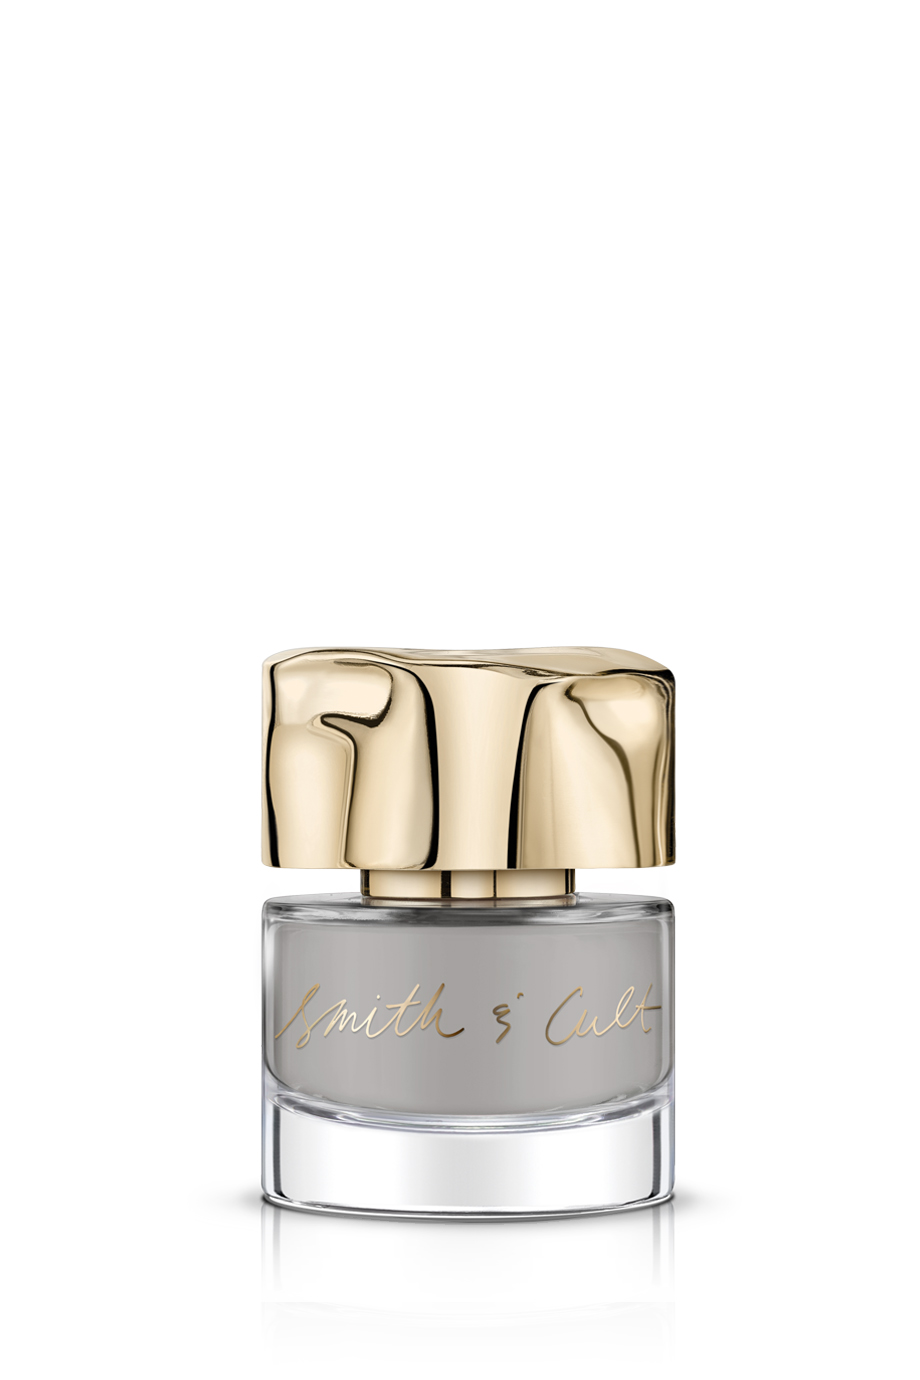 Smith & Cult Subnormal Nail Lacquer